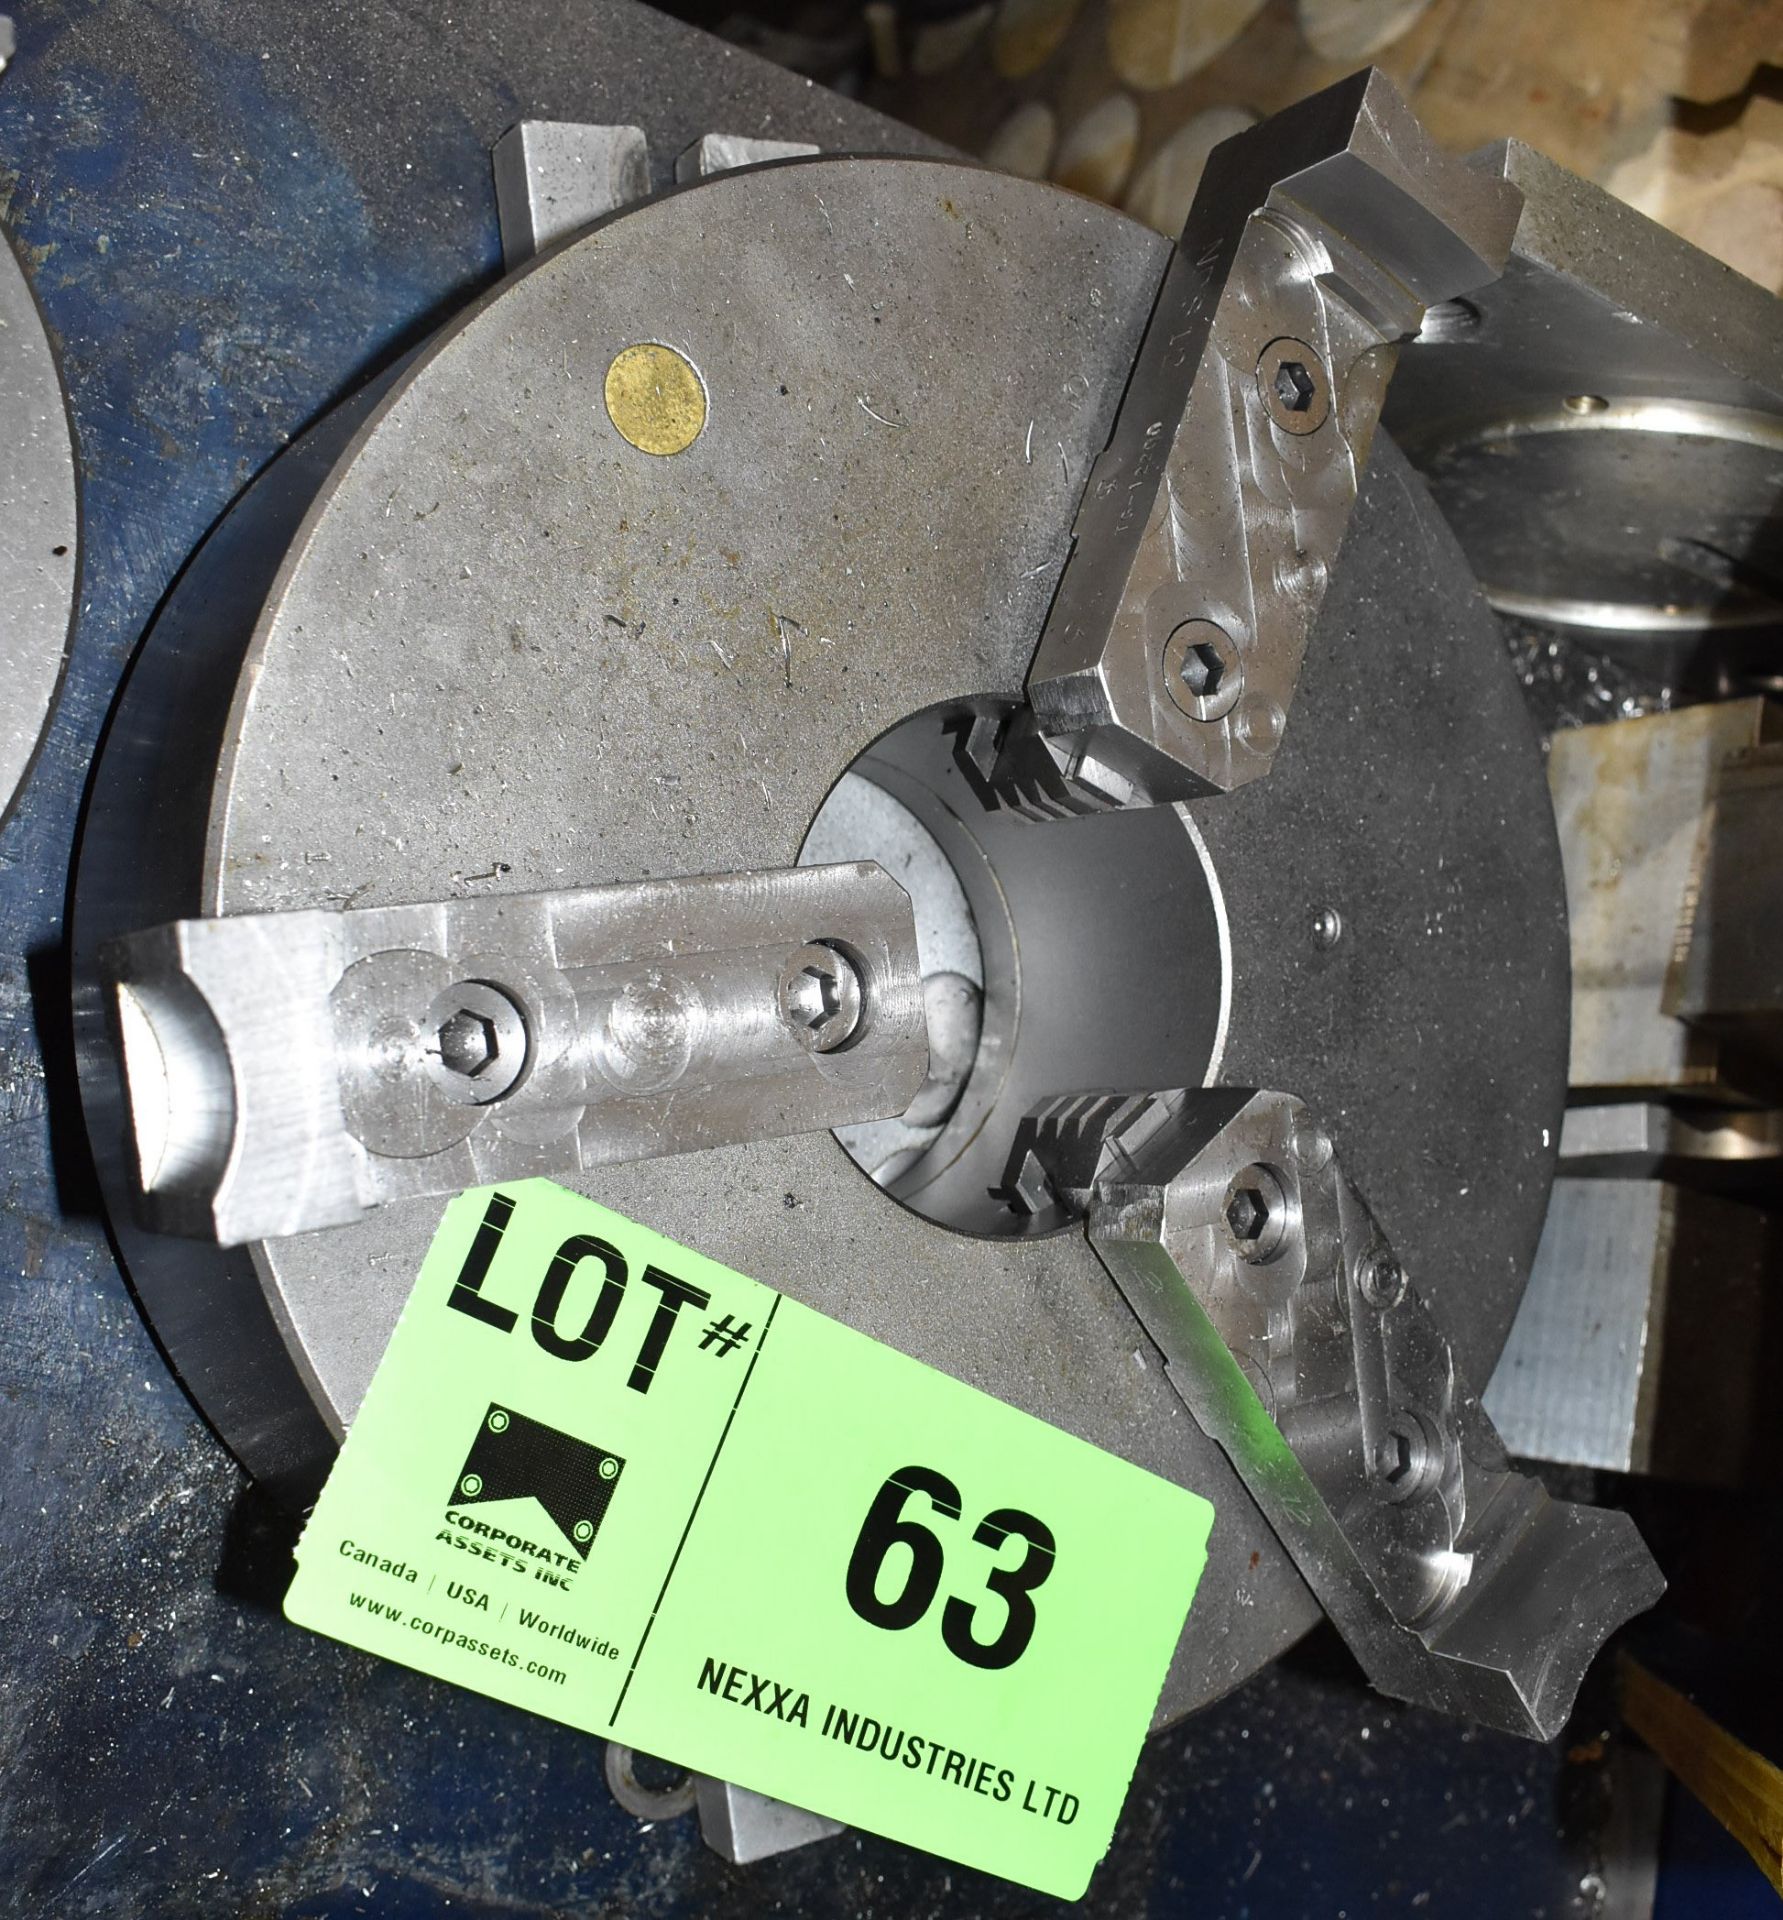 12.5" 3-JAW CHUCK, S/N N/A [RIGGING FEE FOR LOT #63 - $10 CAD PLUS APPLICABLE TAXES]